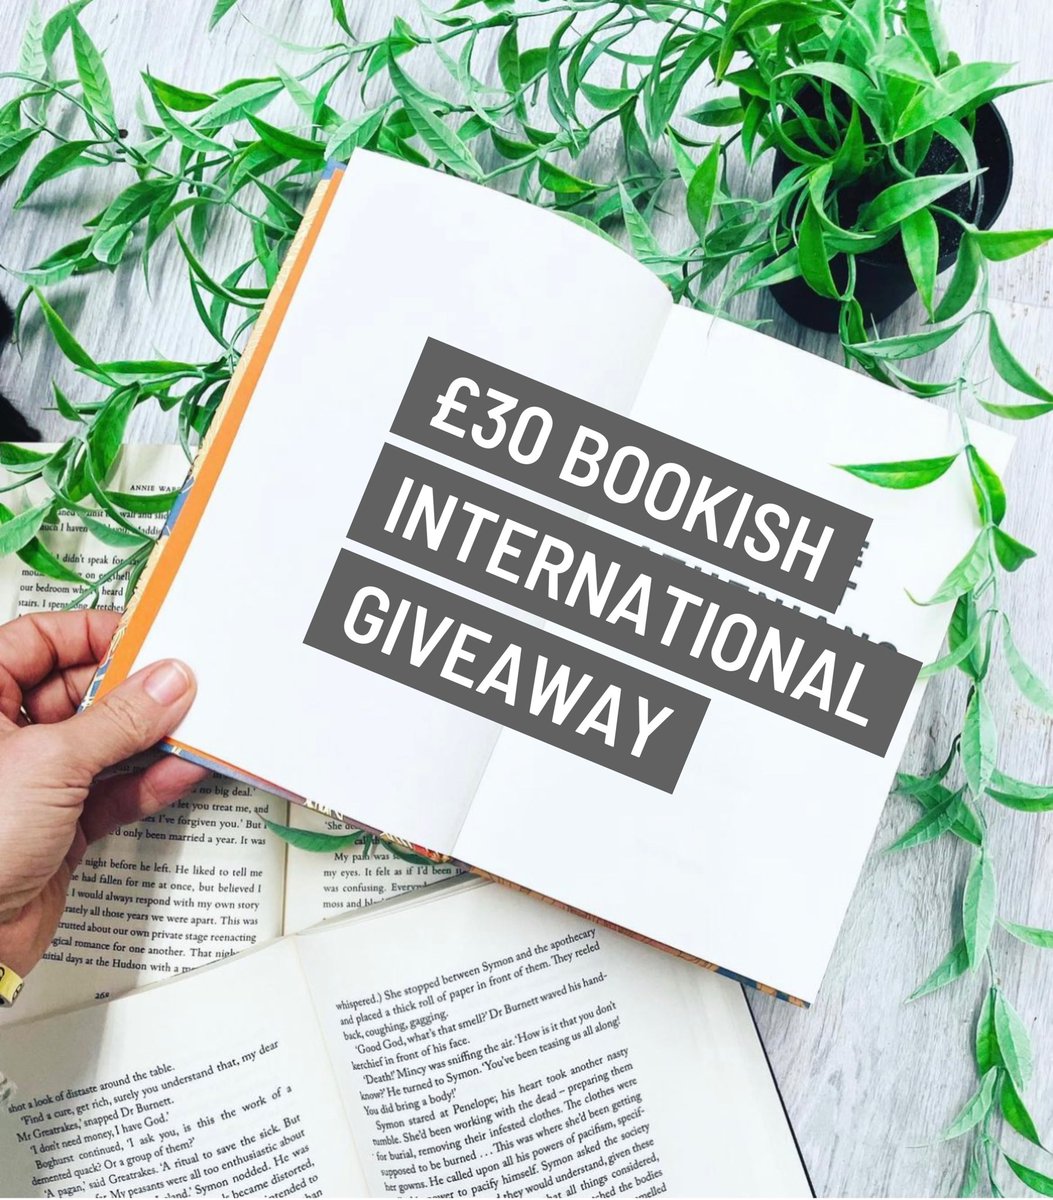 To celebrate the beautiful sunny weather I’m giving away £30 to buy any books you want via Amazon to enjoy reading in the sun ☀️ 

To enter:

☀️Follow me 

☀️RT and like this post

☀️Comment #summerreading 

*Full t&c’s are over on insta

#booklovers #giveaway